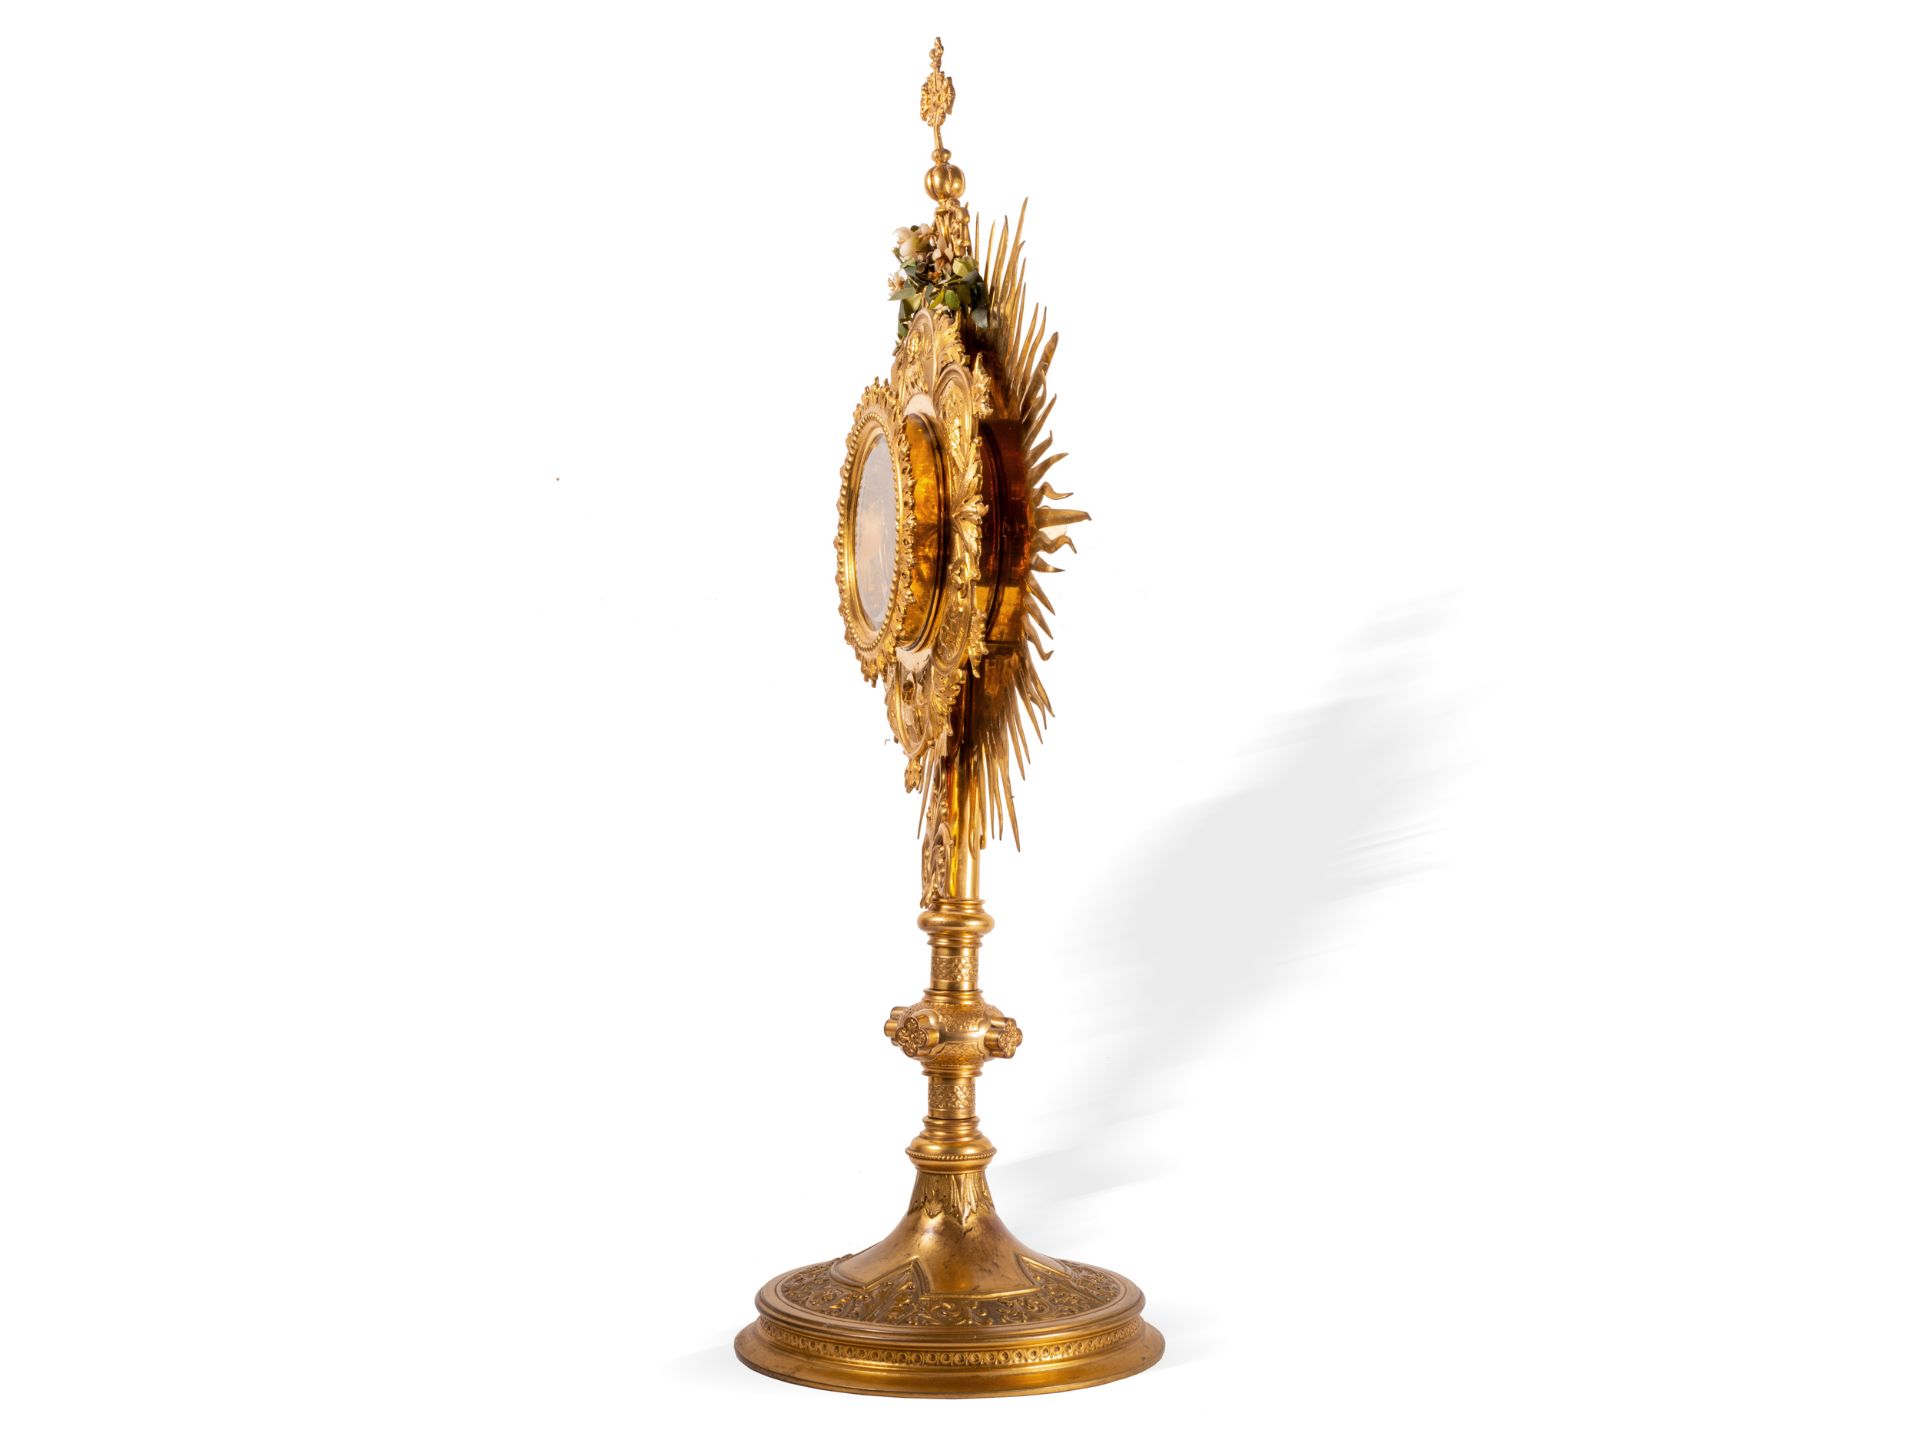 Monstrance, 19th century, Cast brass or bronze, handmolded and engraved - Image 4 of 7